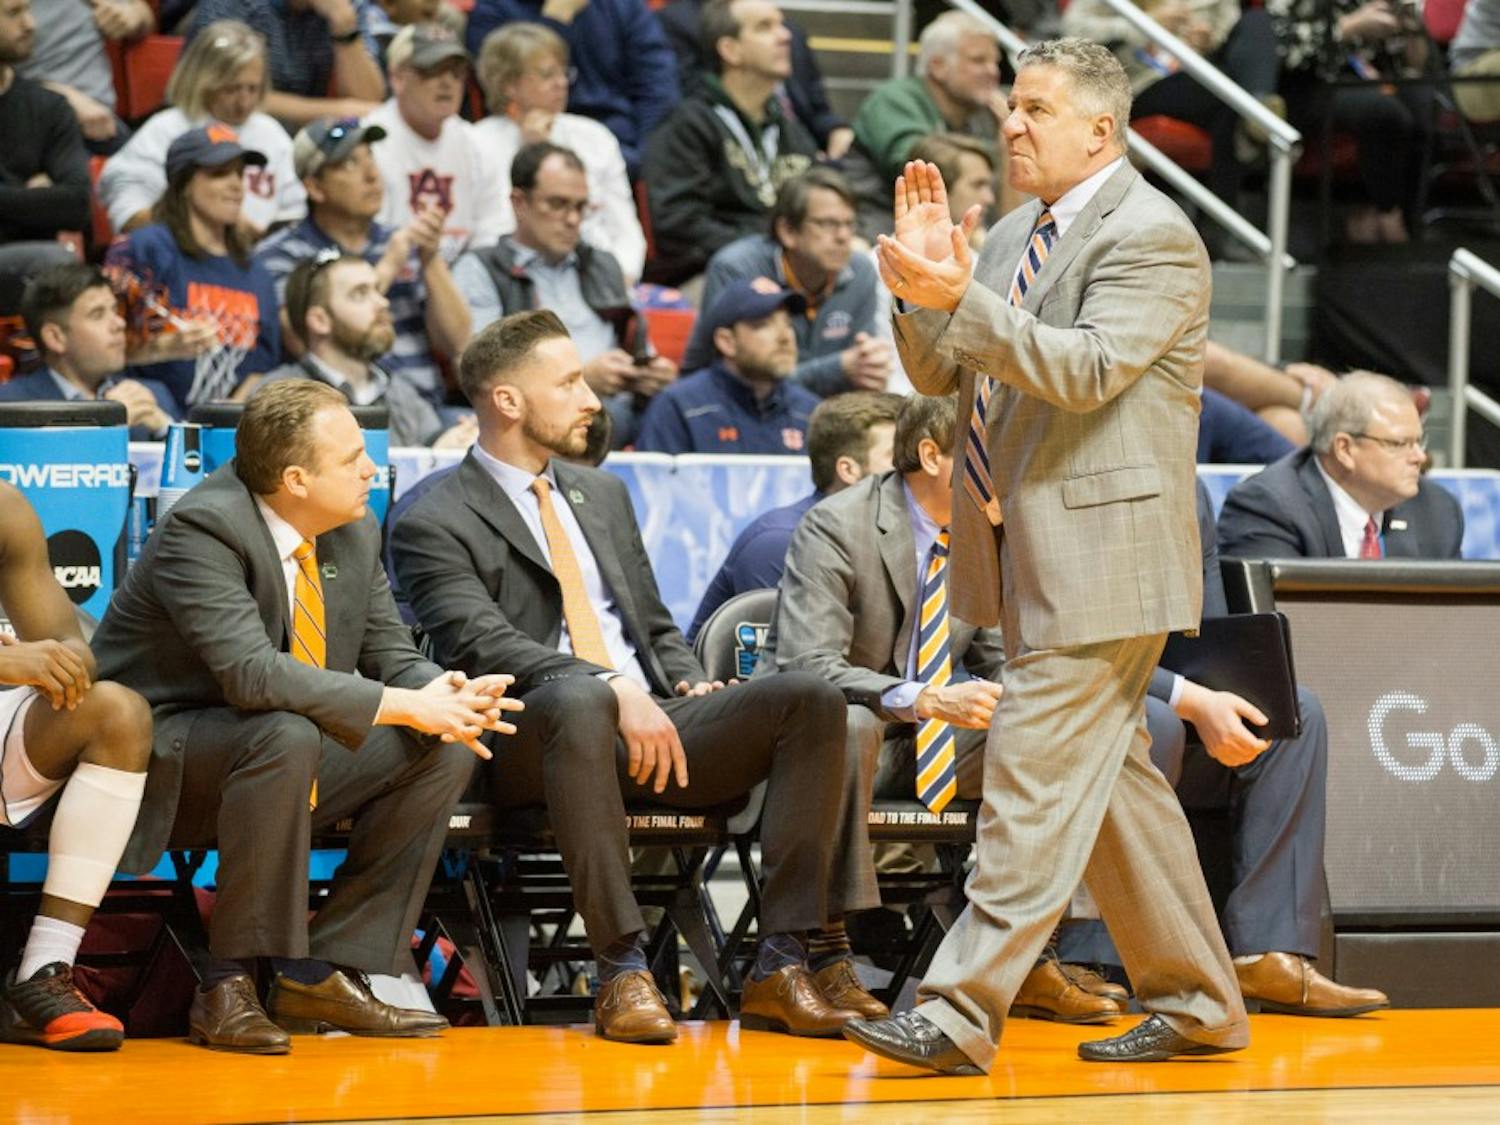 Head coach Bruce Pearl reacts&nbsp;during Auburn basketball vs. Clemson on Sunday, March 18, 2018, at Viejas Arena in San Diego, Calif.